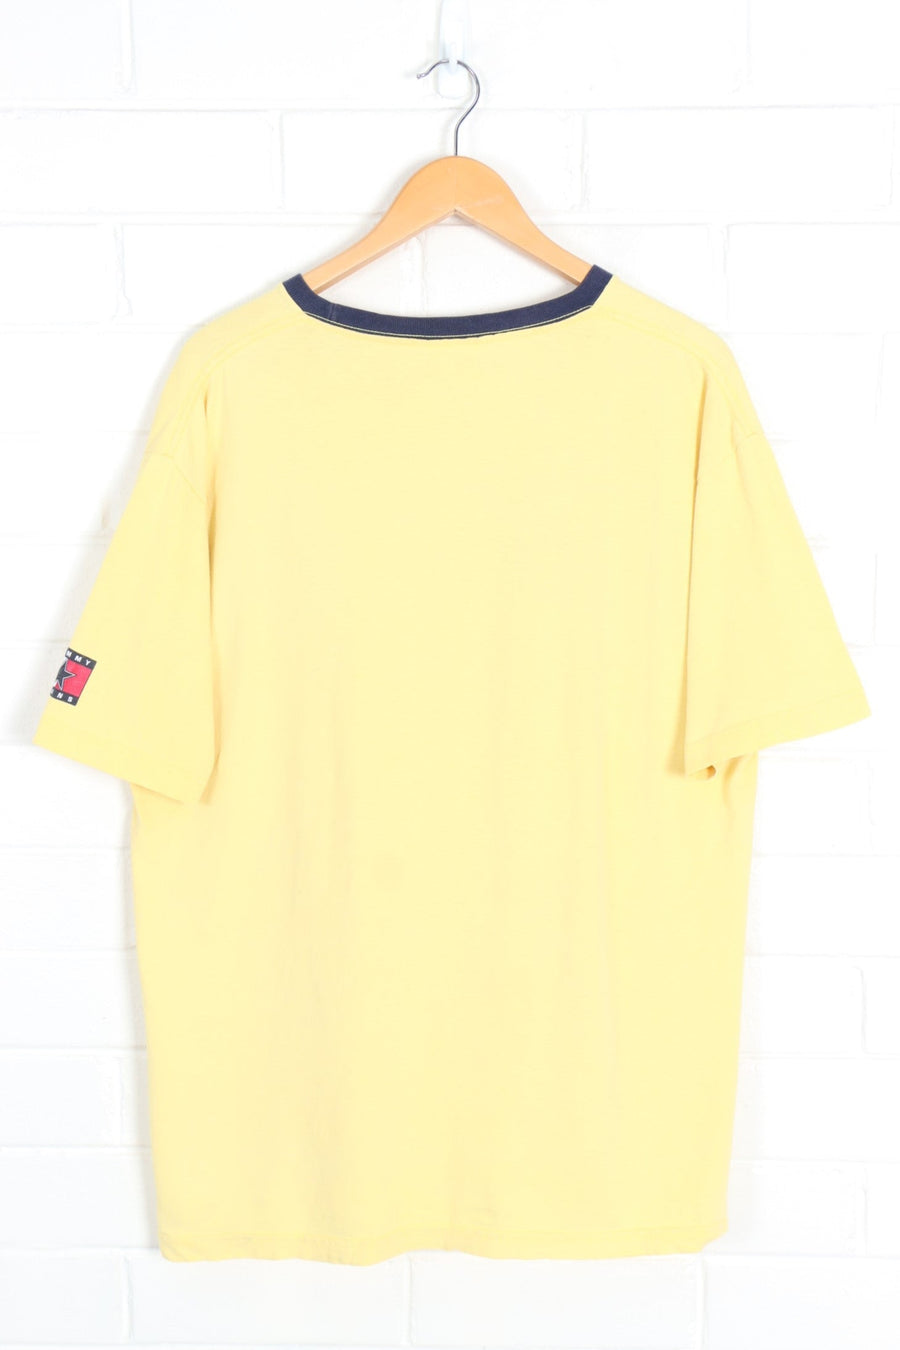 Yellow TOMMY HILFIGER JEANS Graphic Tee (XL) - Vintage Sole Melbourne